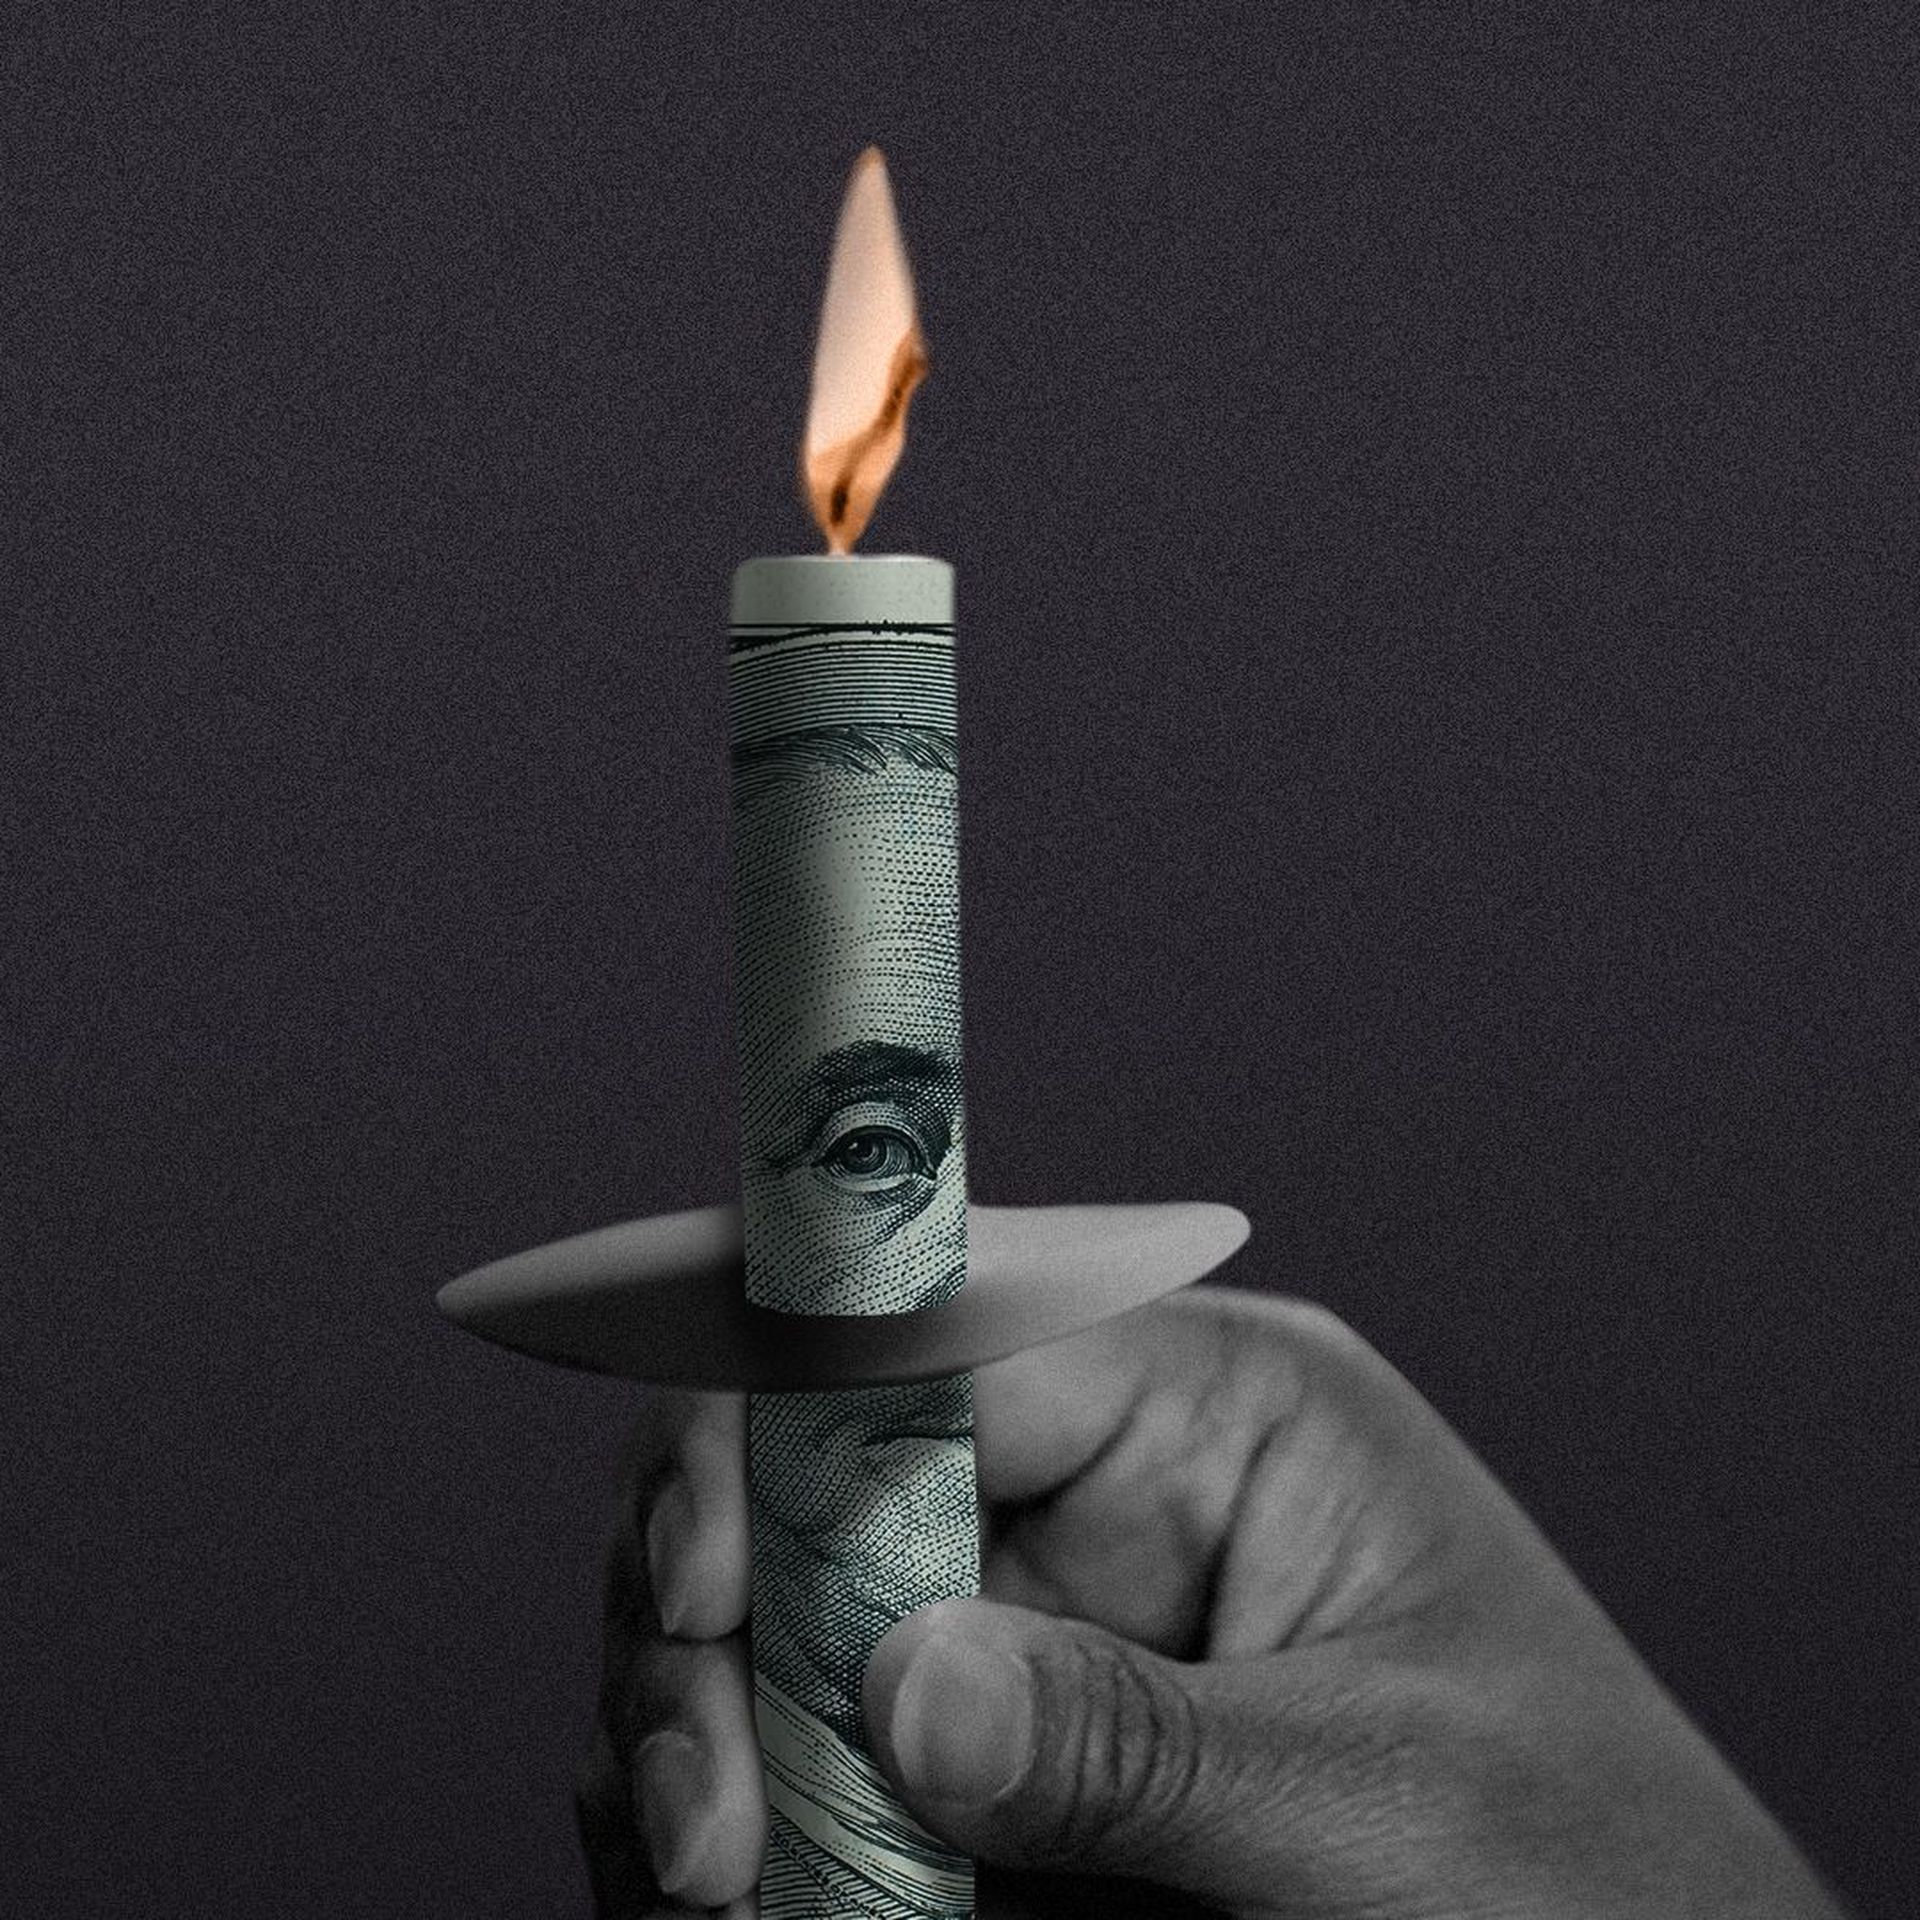 Illustration of a hand at a vigil holding a candle wrapped in a $100 bill.